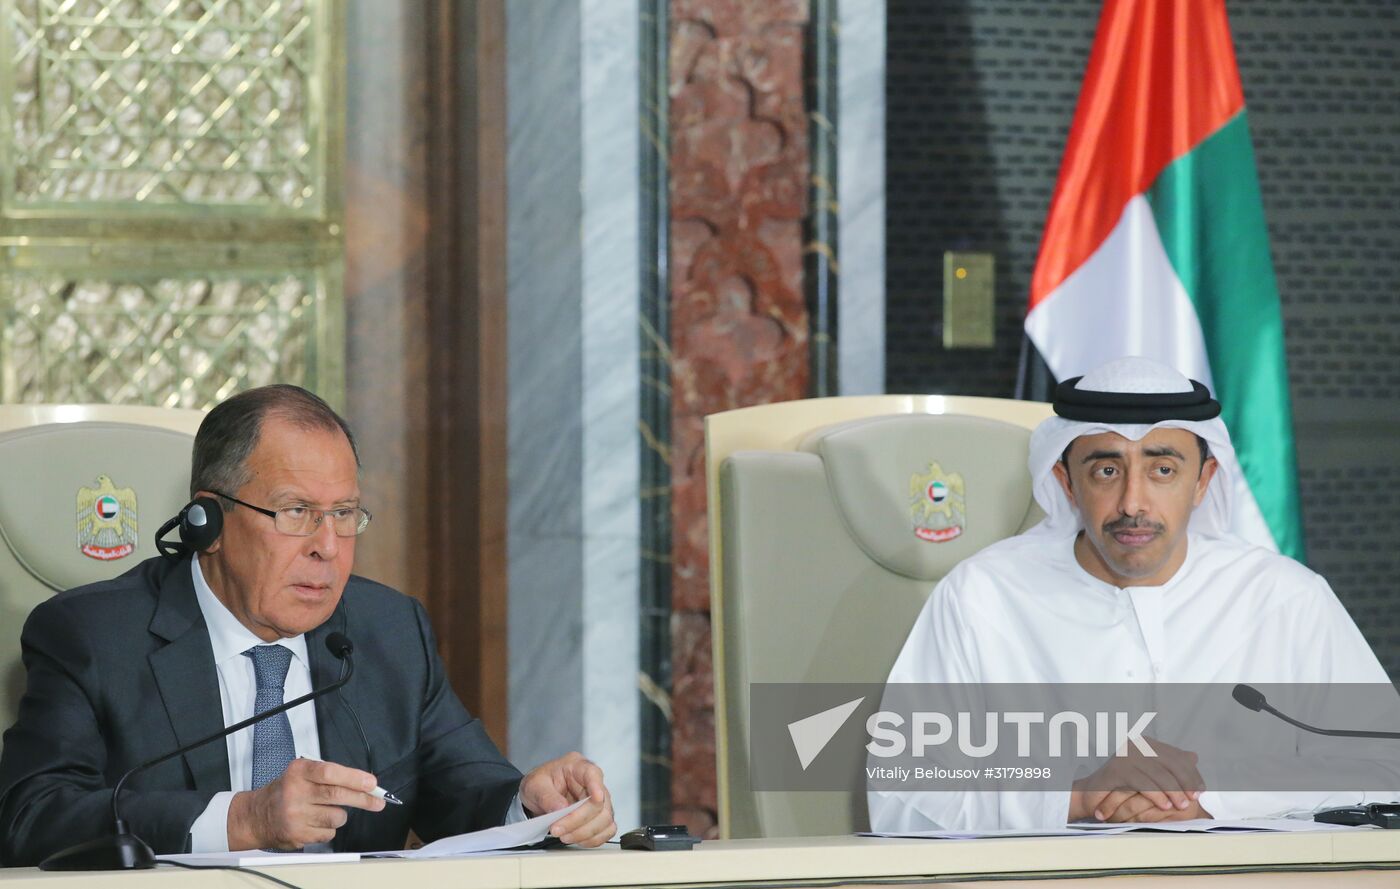 Russian Foreign Minister Sergei Lavrov visits the United Arab Emirates